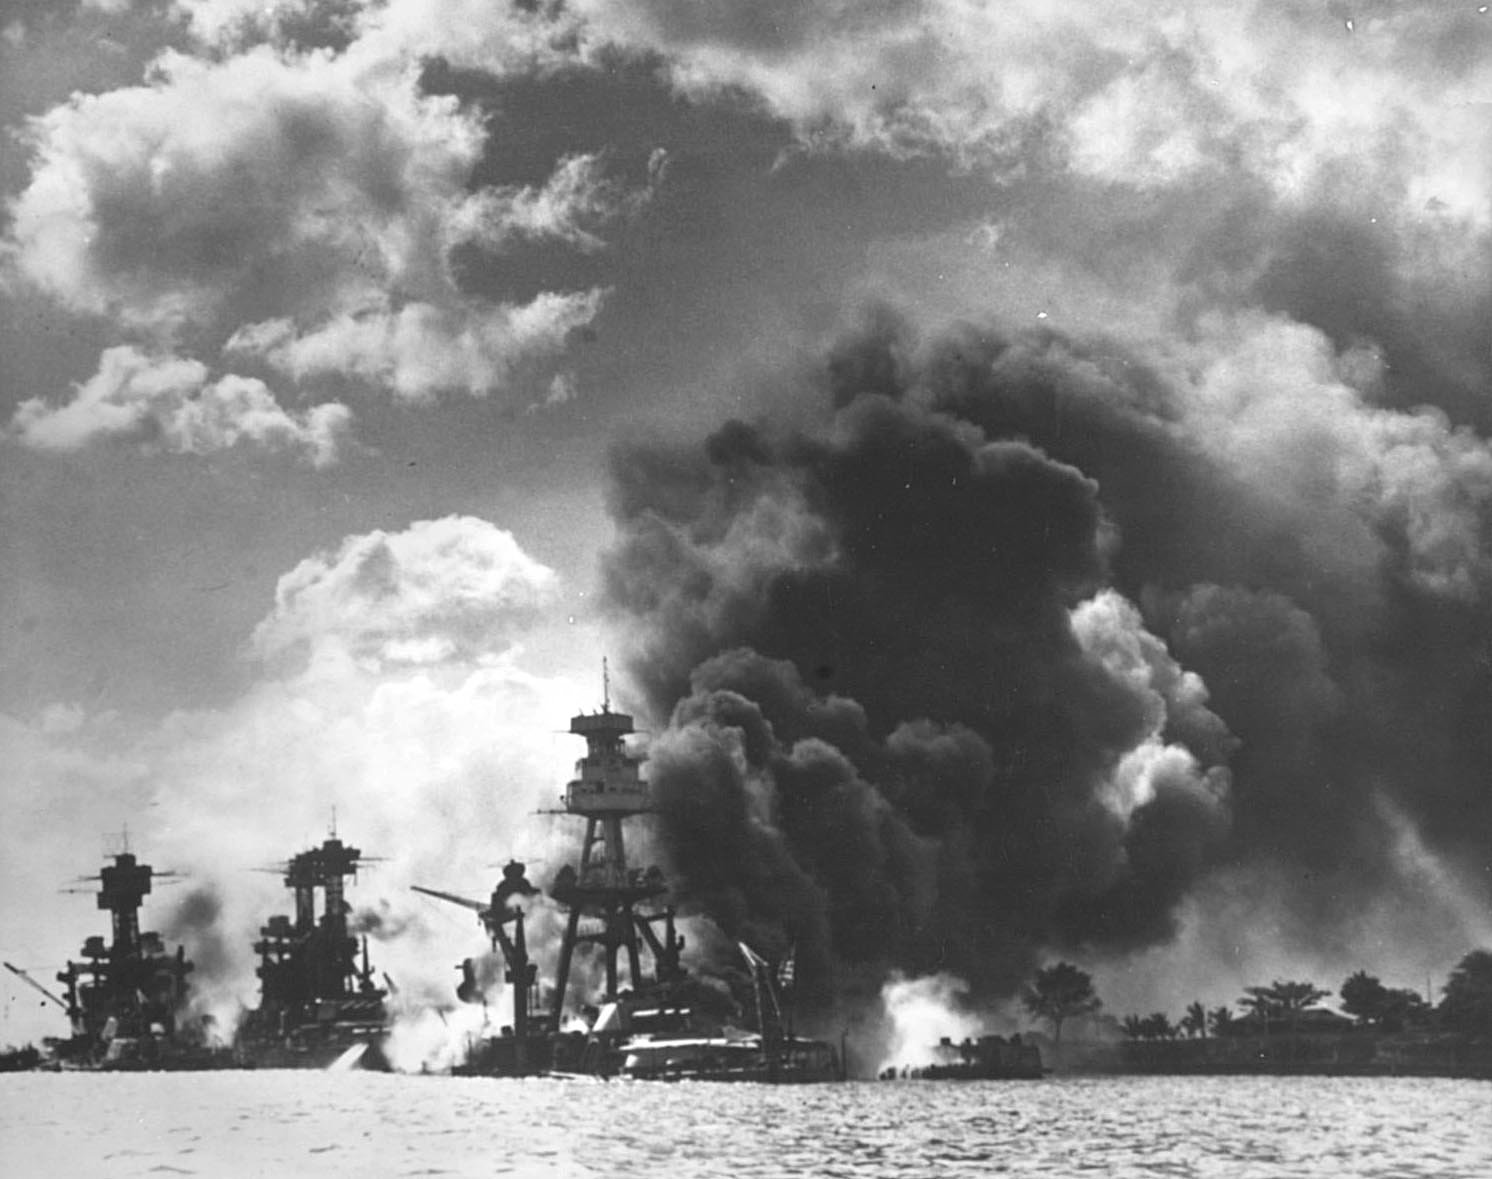 (L- R) ARIZONA, TENNESSEE AND WEST VIRGINIA ALL DESTROYED THE BOMBING RAID.
WORLD WAR II - PEARL HARBOR, AMERICA - 07 DEC 1941